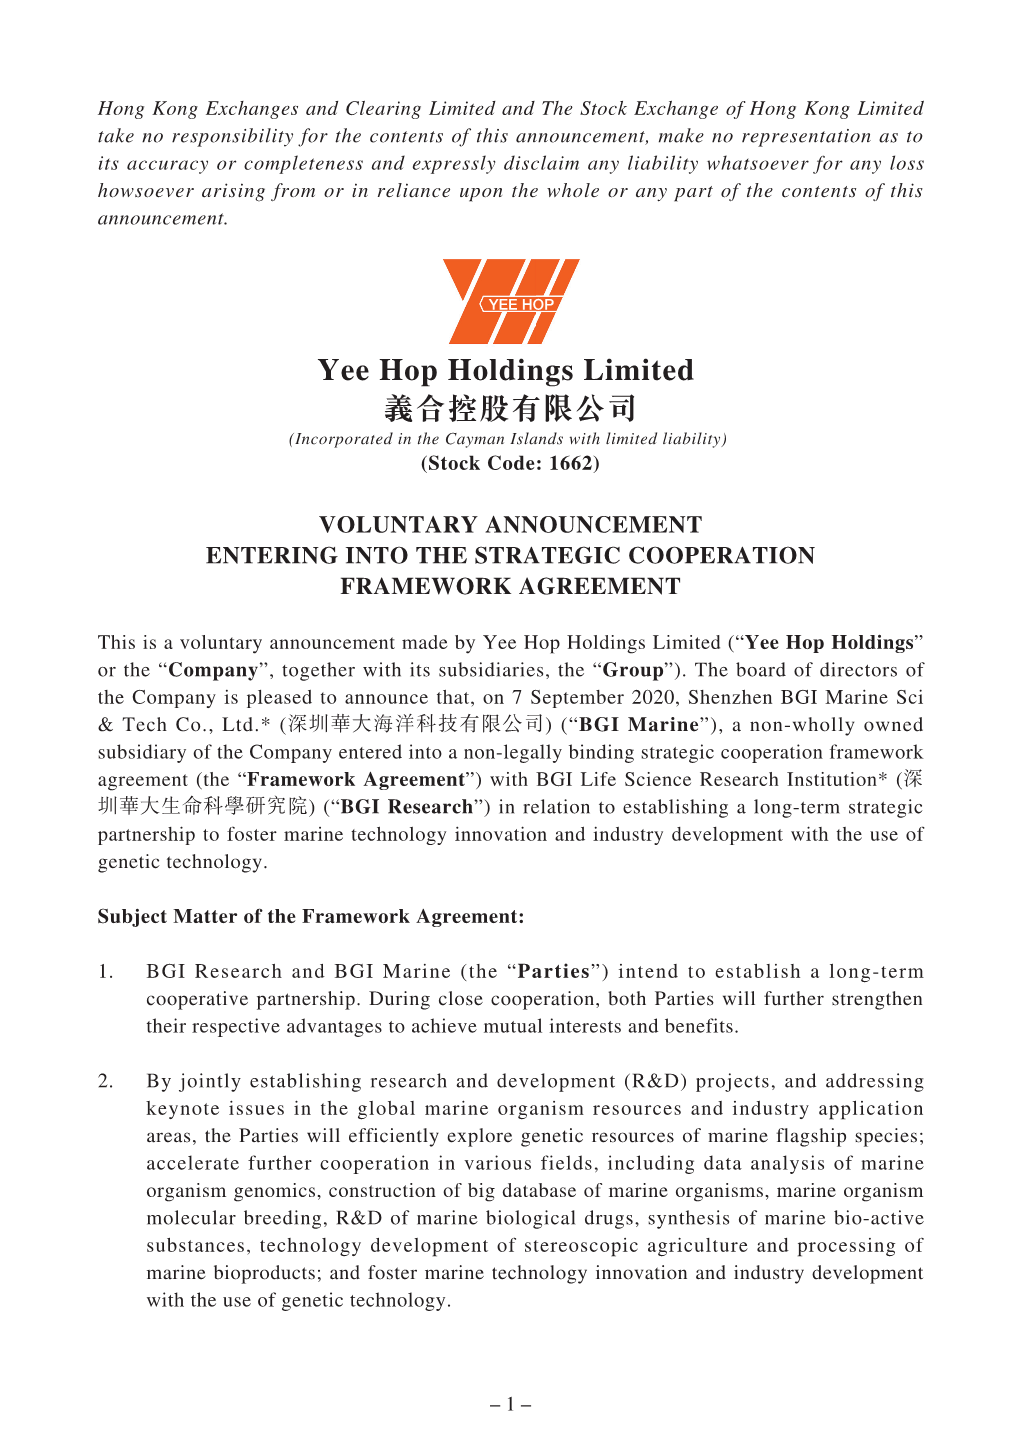 Yee Hop Holdings Limited 義合控股有限公司 (Incorporated in the Cayman Islands with Limited Liability) (Stock Code: 1662)